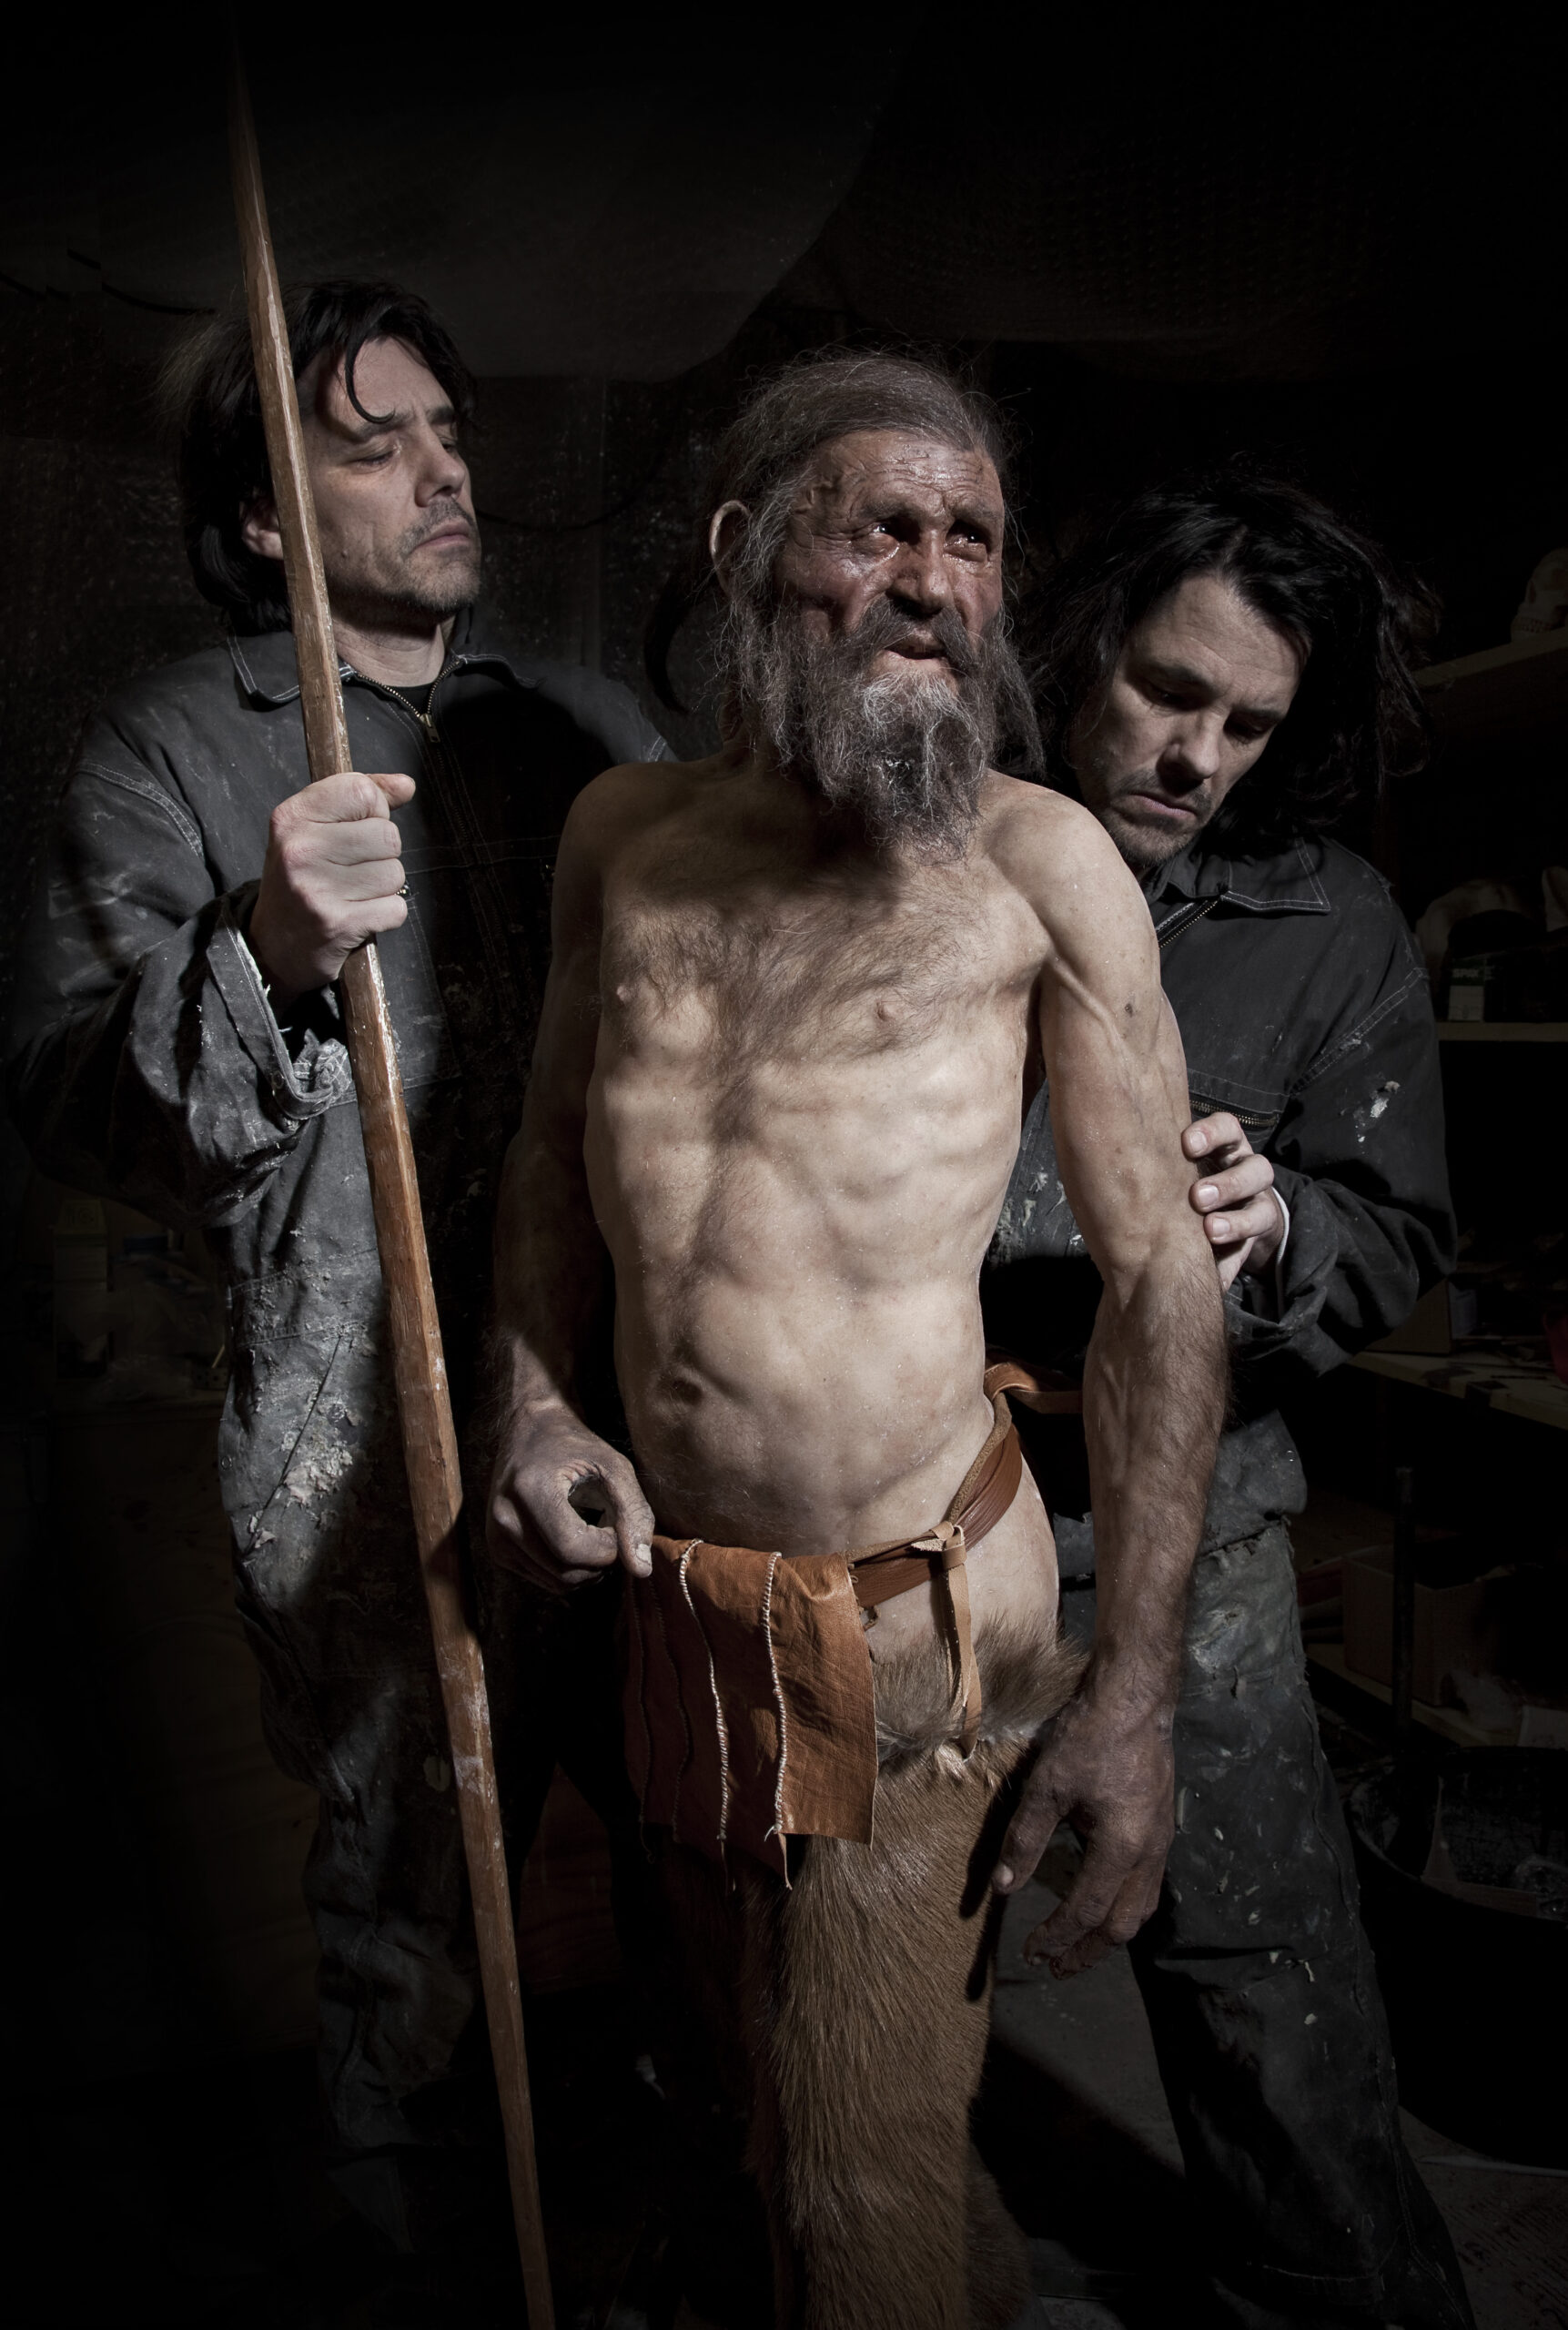 Reconstruction of Ötzi the Iceman with paleoartists Alfons and Adrie Kennis